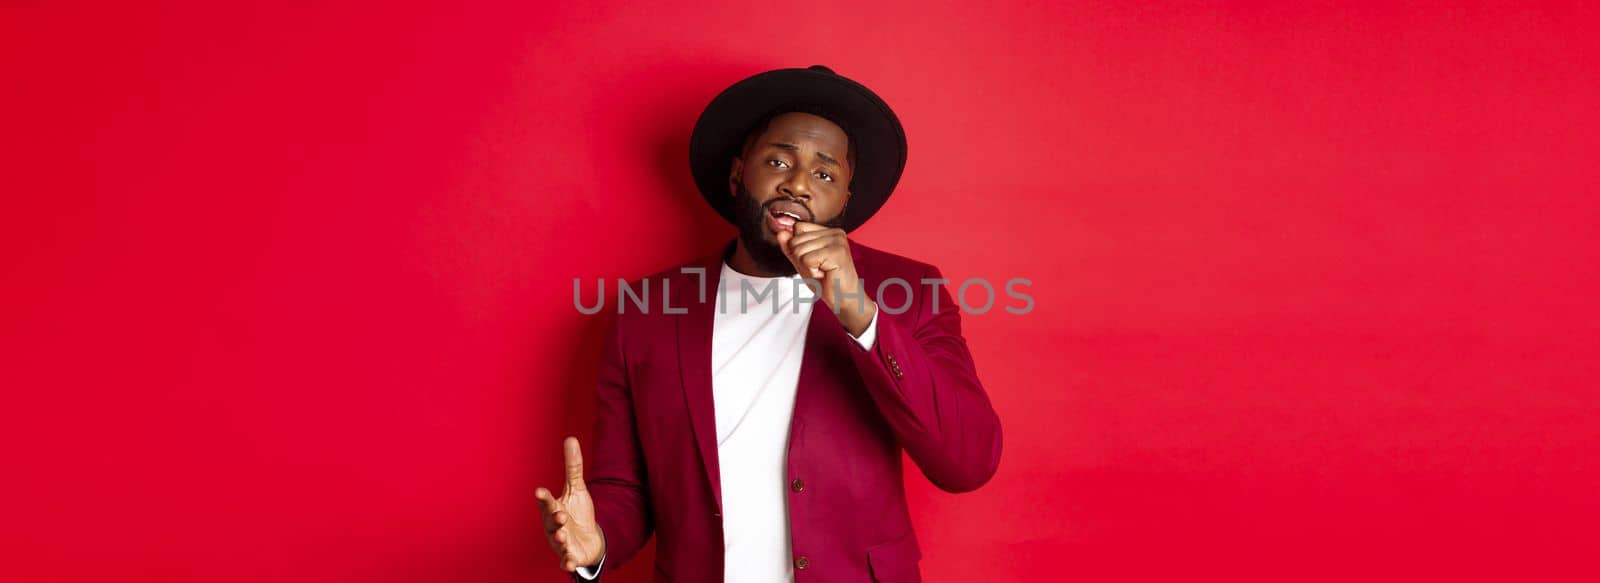 Christmas shopping and people concept. Handsome Black male model in party outfit singing in invisible microphone, looking passionate at camera, red background.